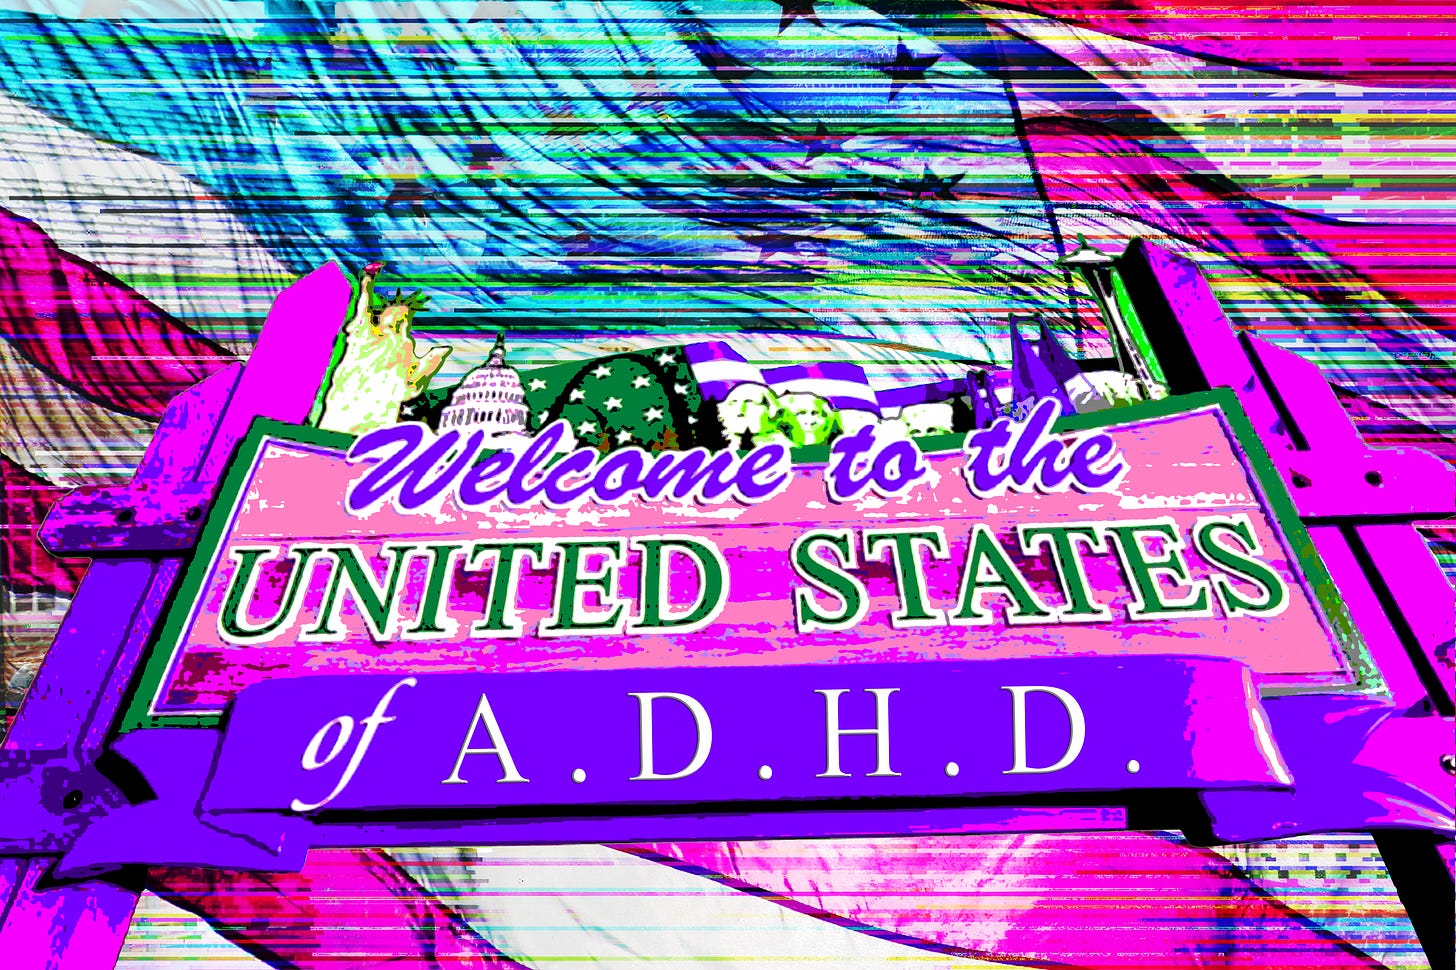 sign that says "welcome to the united states of ADHD" on top of a glitching american flag background